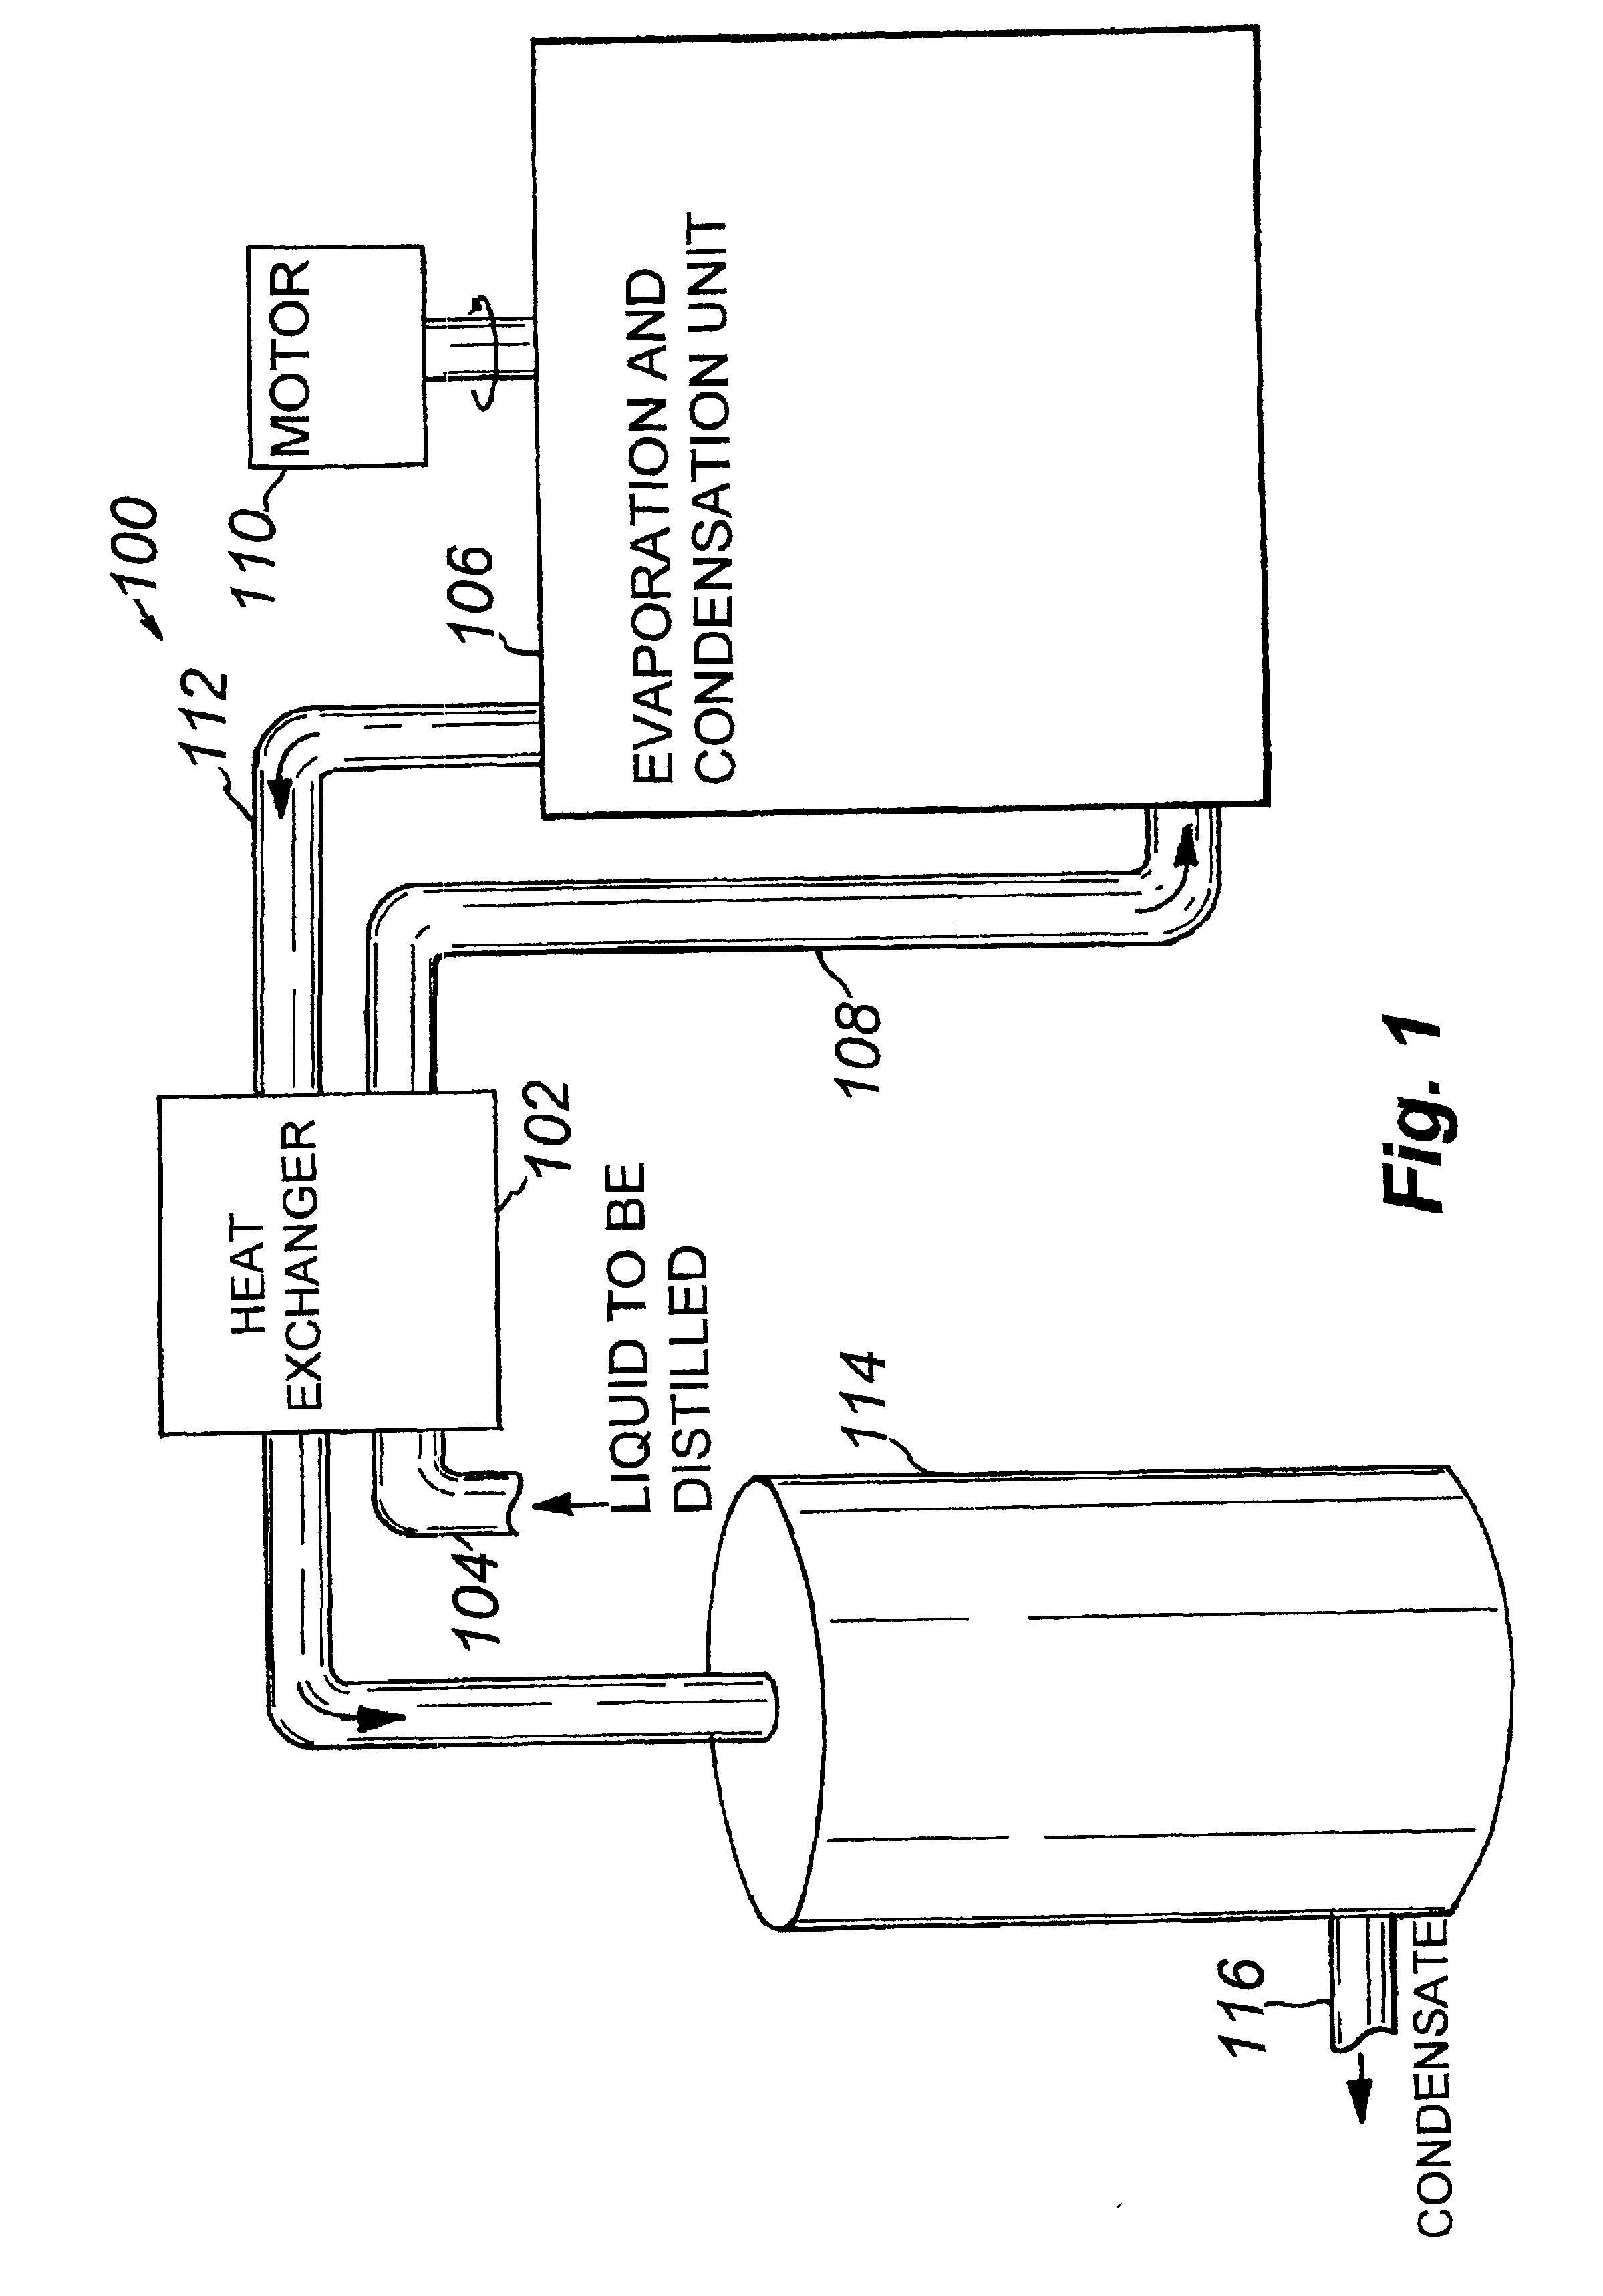 Rotating fluid evaporator and condenser